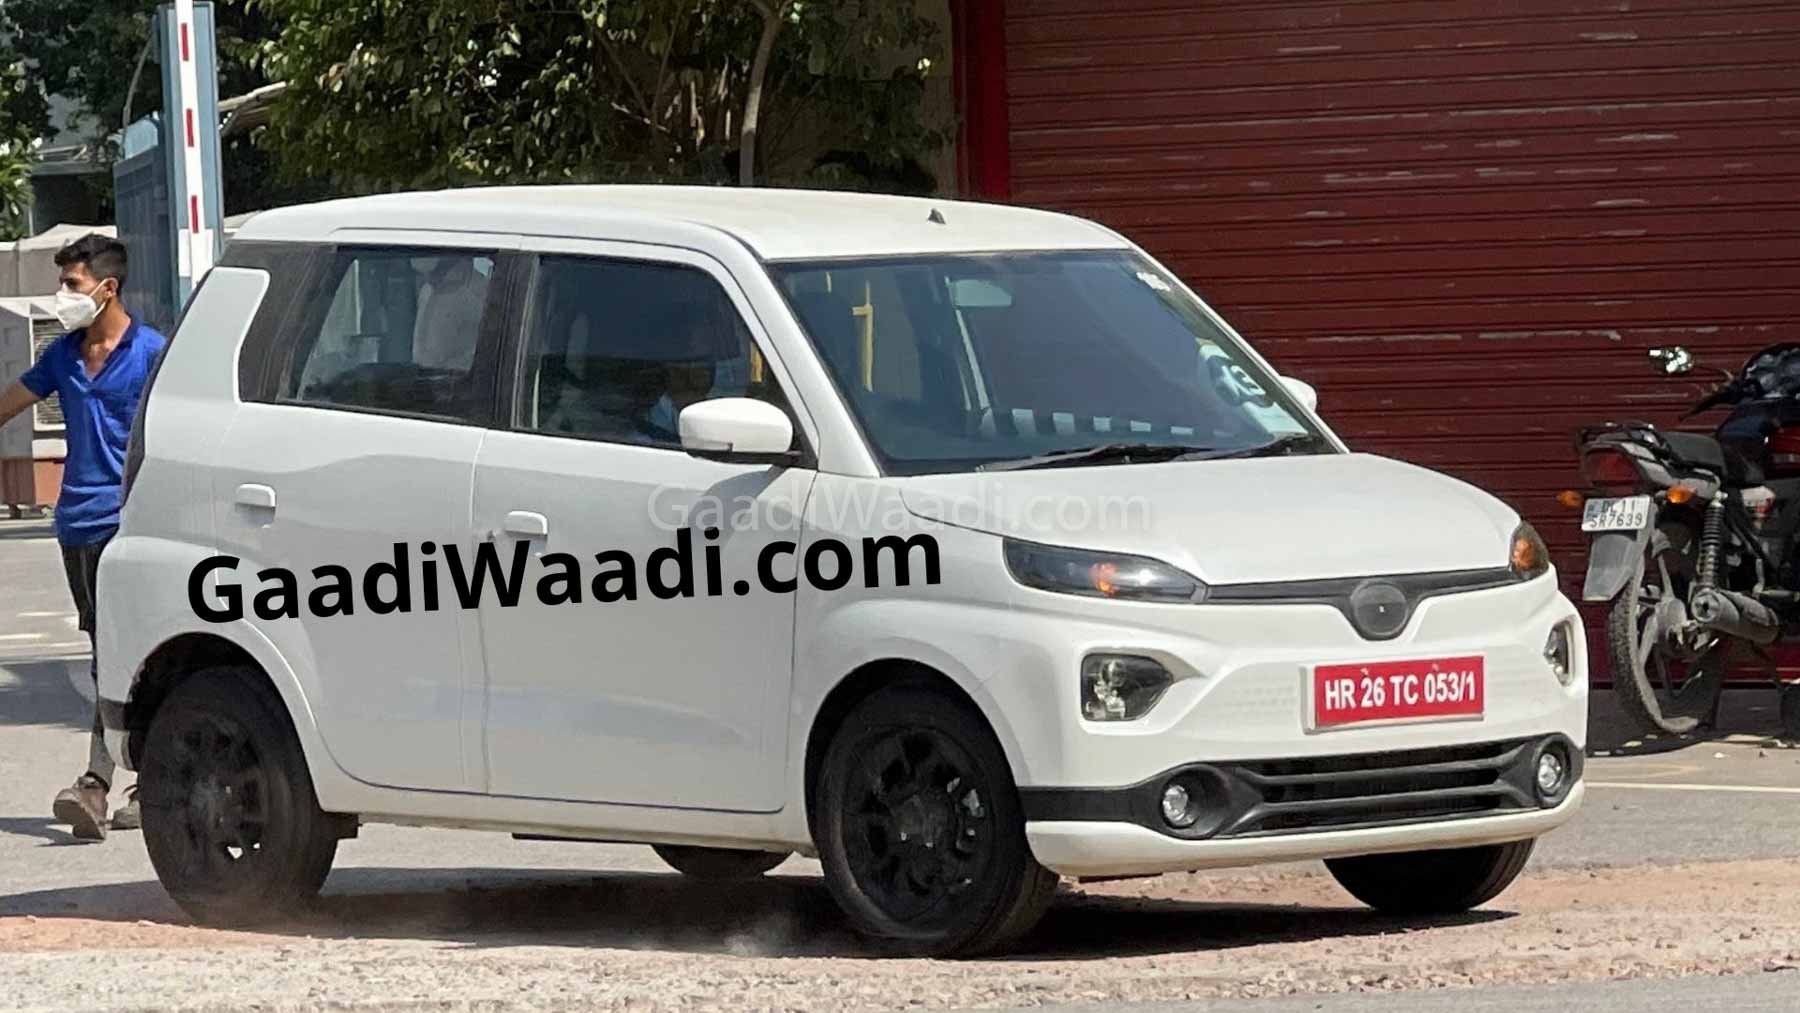 Wagon R Electric Hatchback Spied Testing Again In India